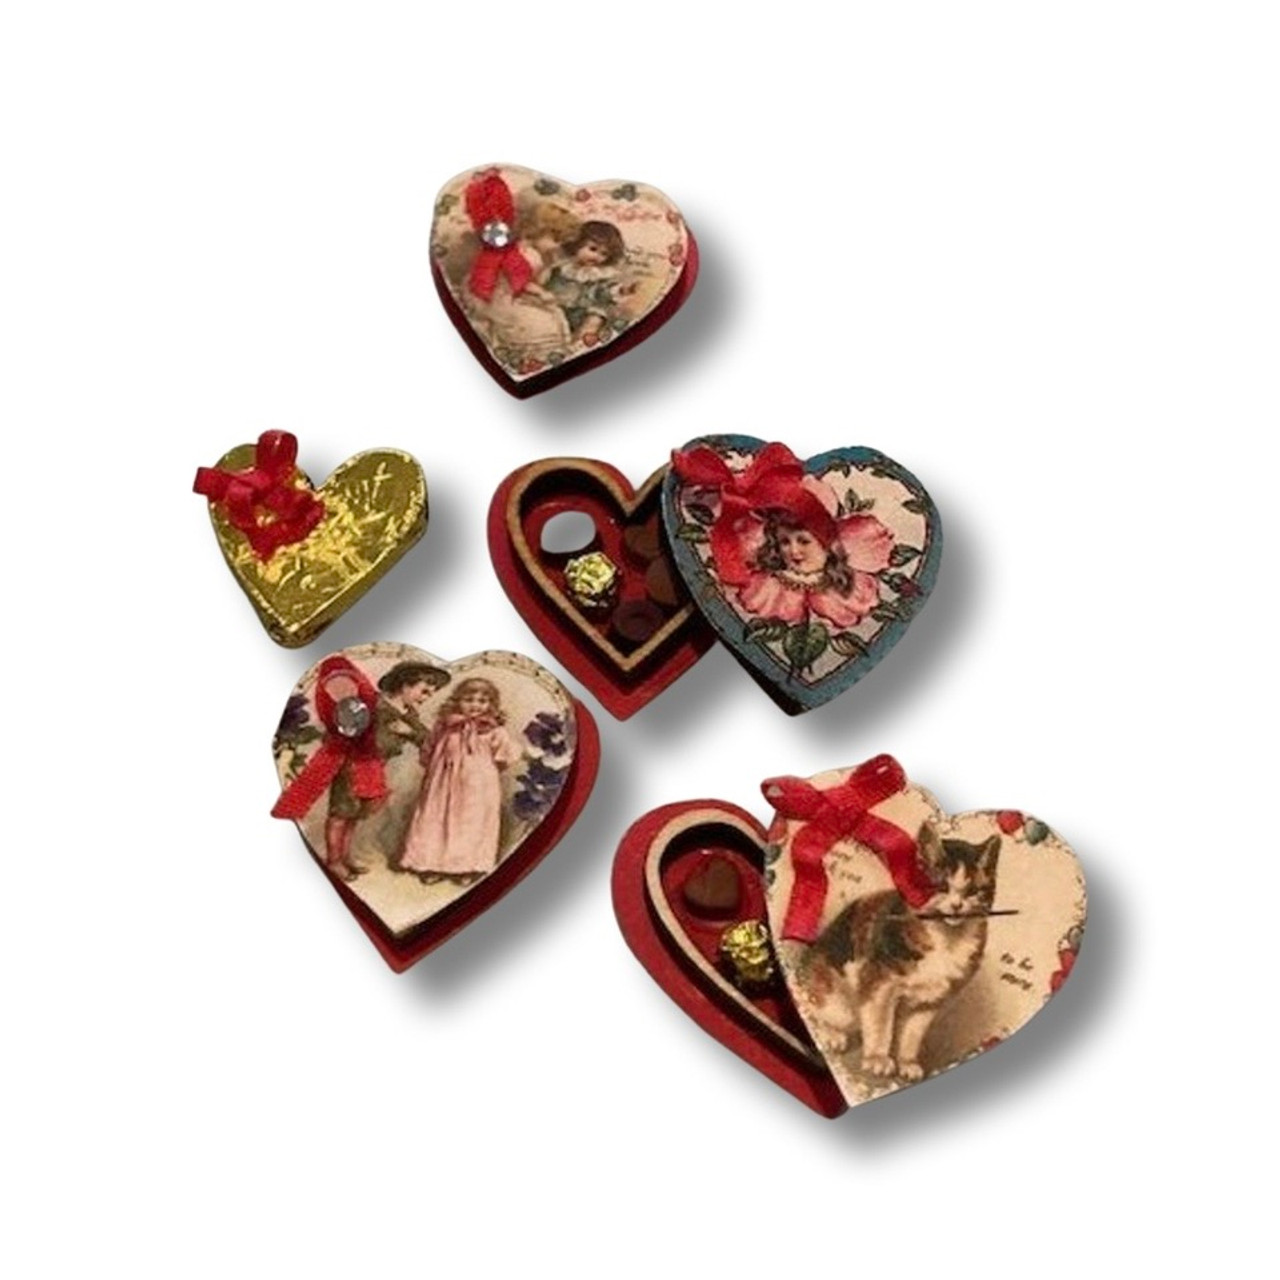 Heart Shaped Candy Box Kit (DFI-CB207) showing cover options included in kit.